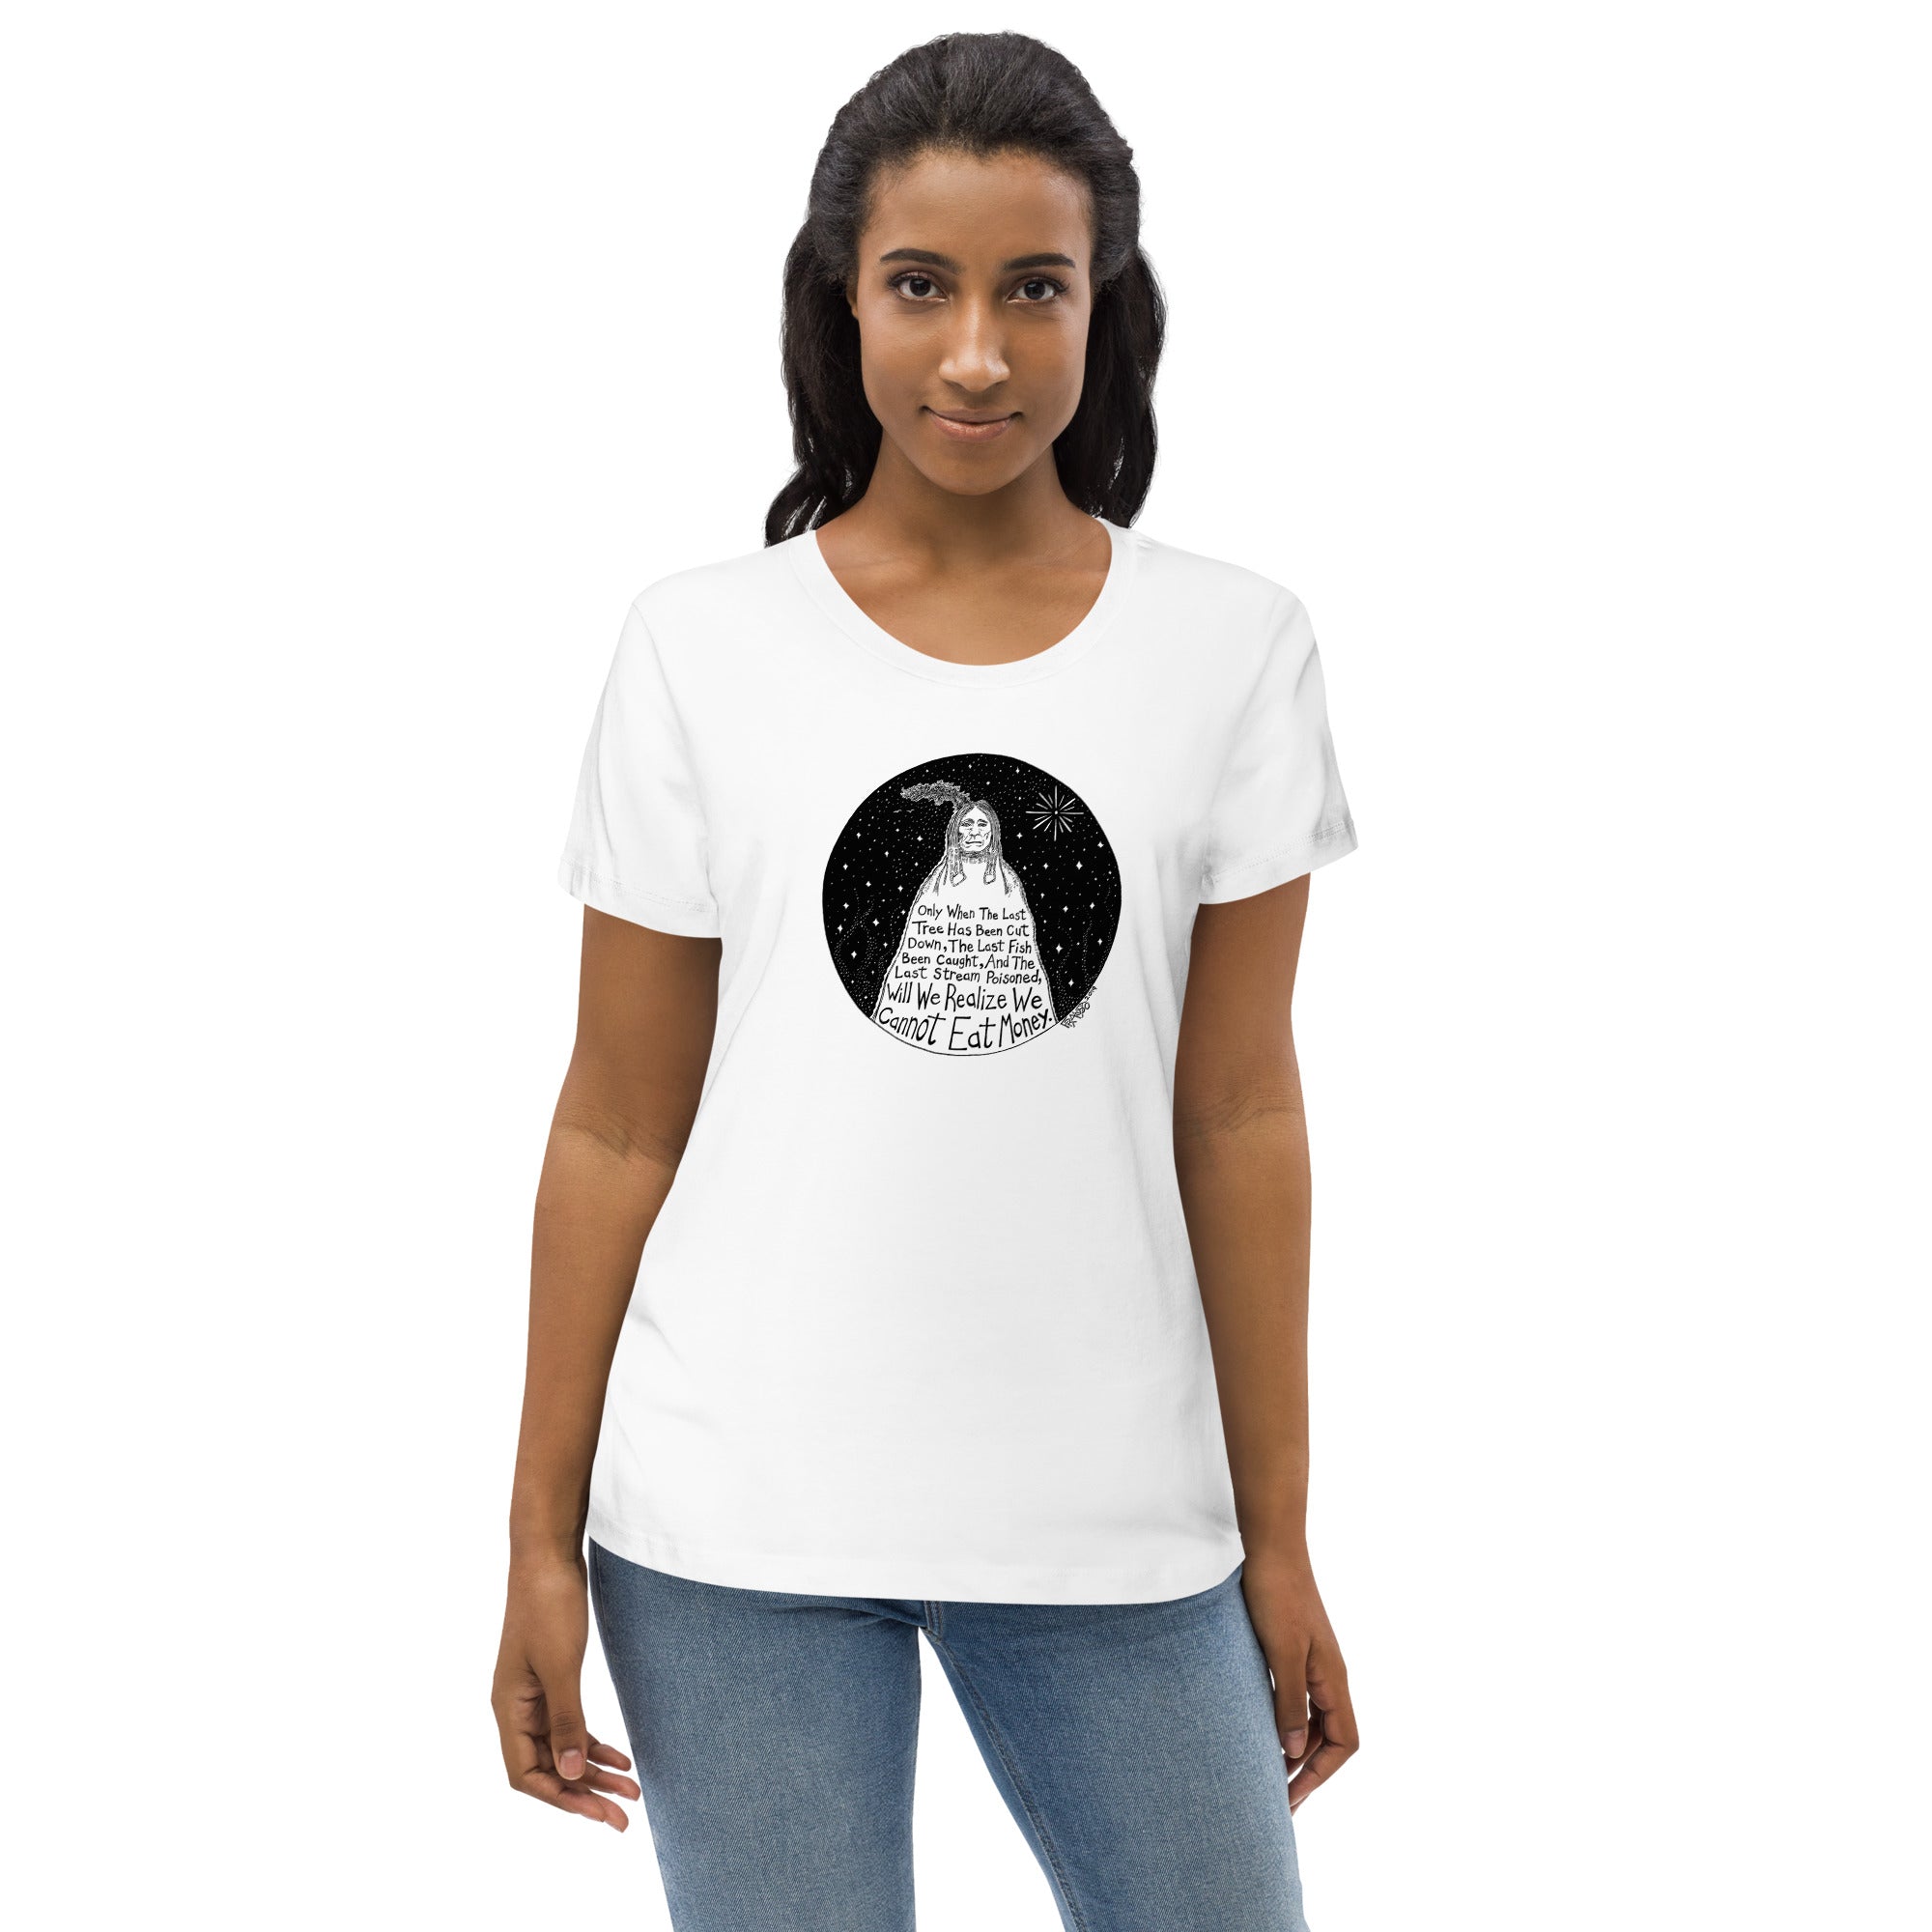 Native American Proverb Organic Cotton Scoop Neck T-Shirt In White By Artist Rick Frausto